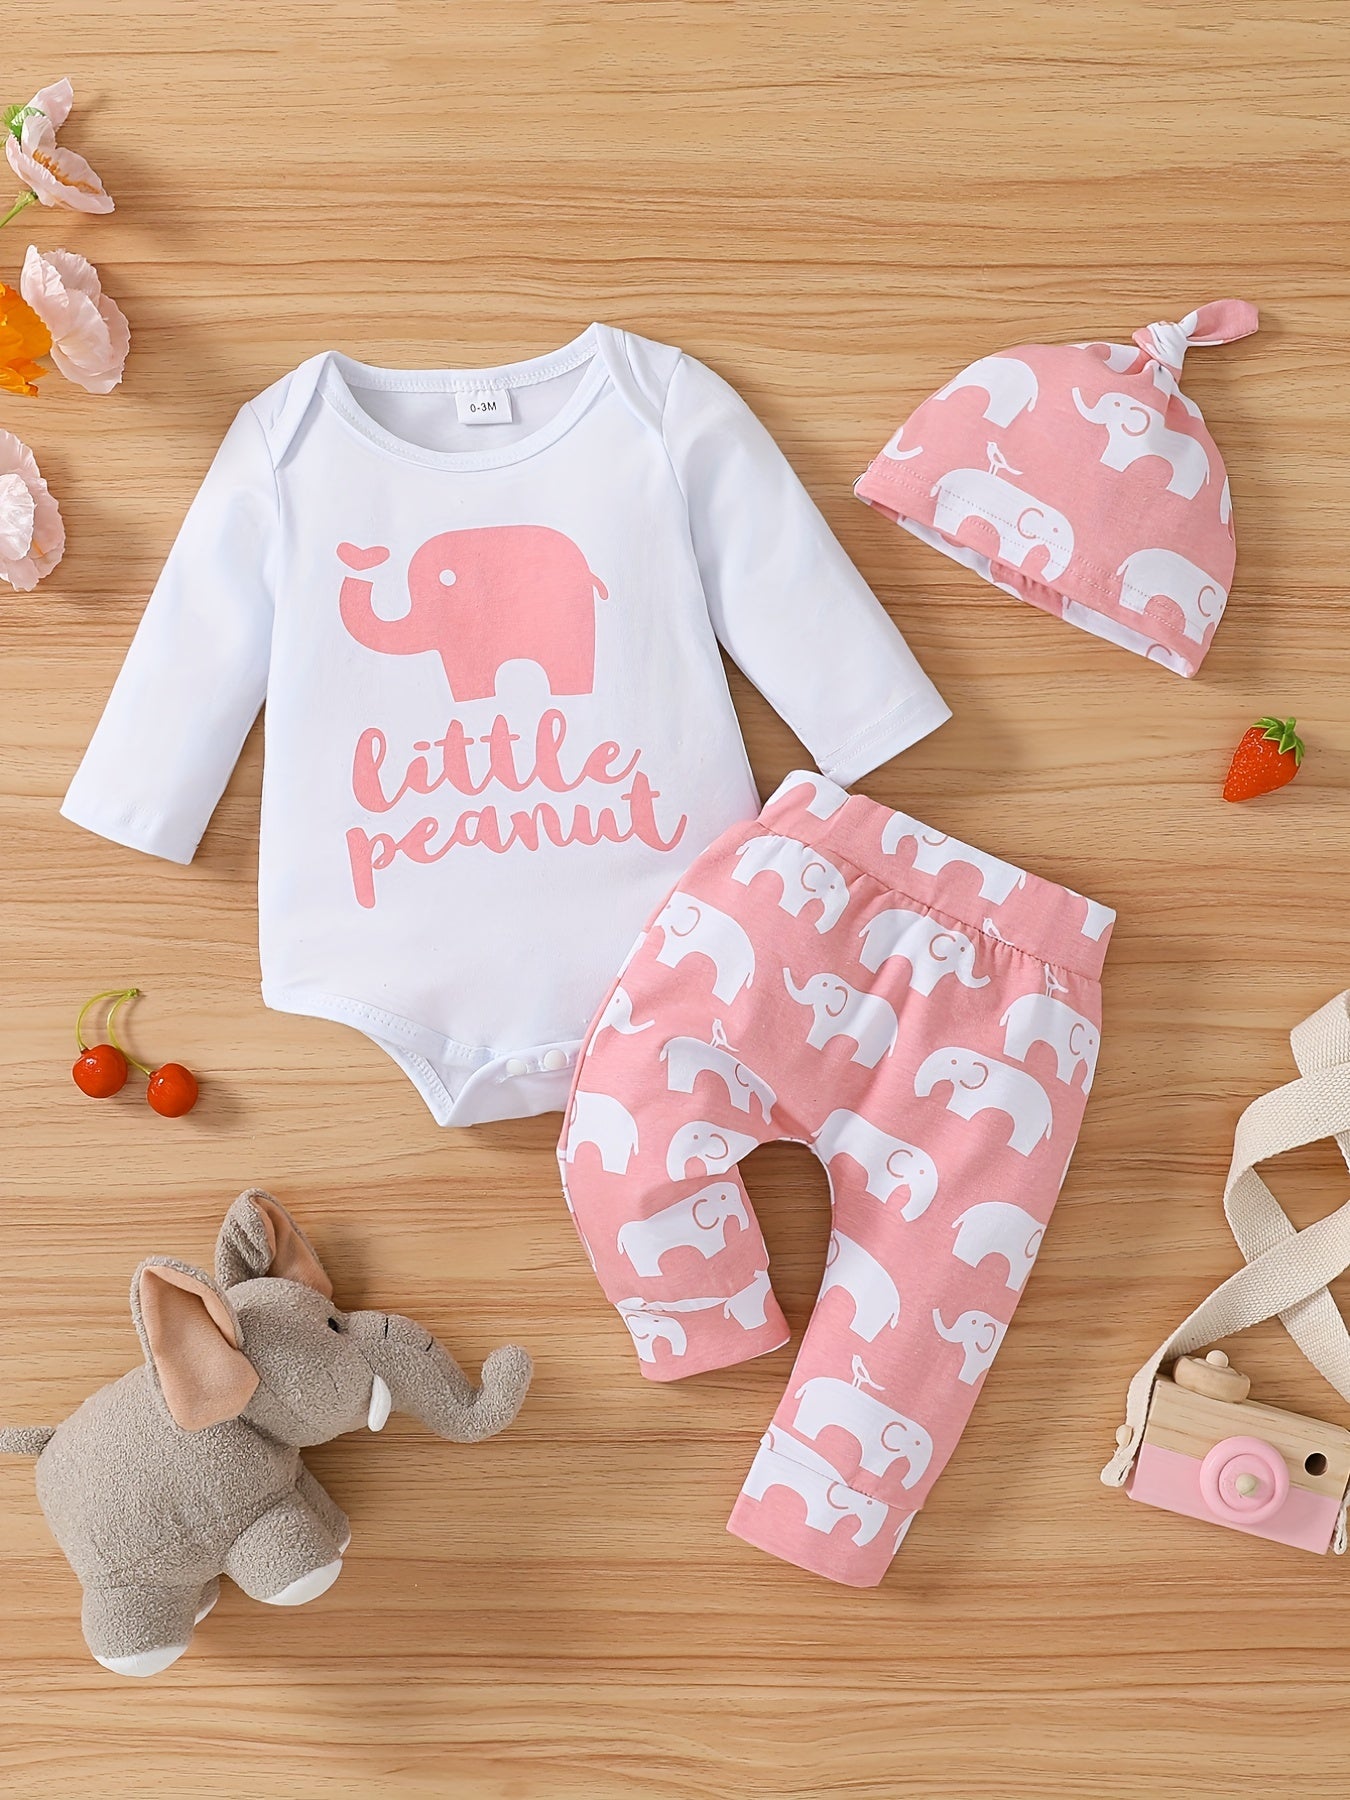 Baby Boys Cotton Bodysuit + Matching Pants + Hat With Elephant Print, Long Sleeve Romper Onesie Set Baby Clothes